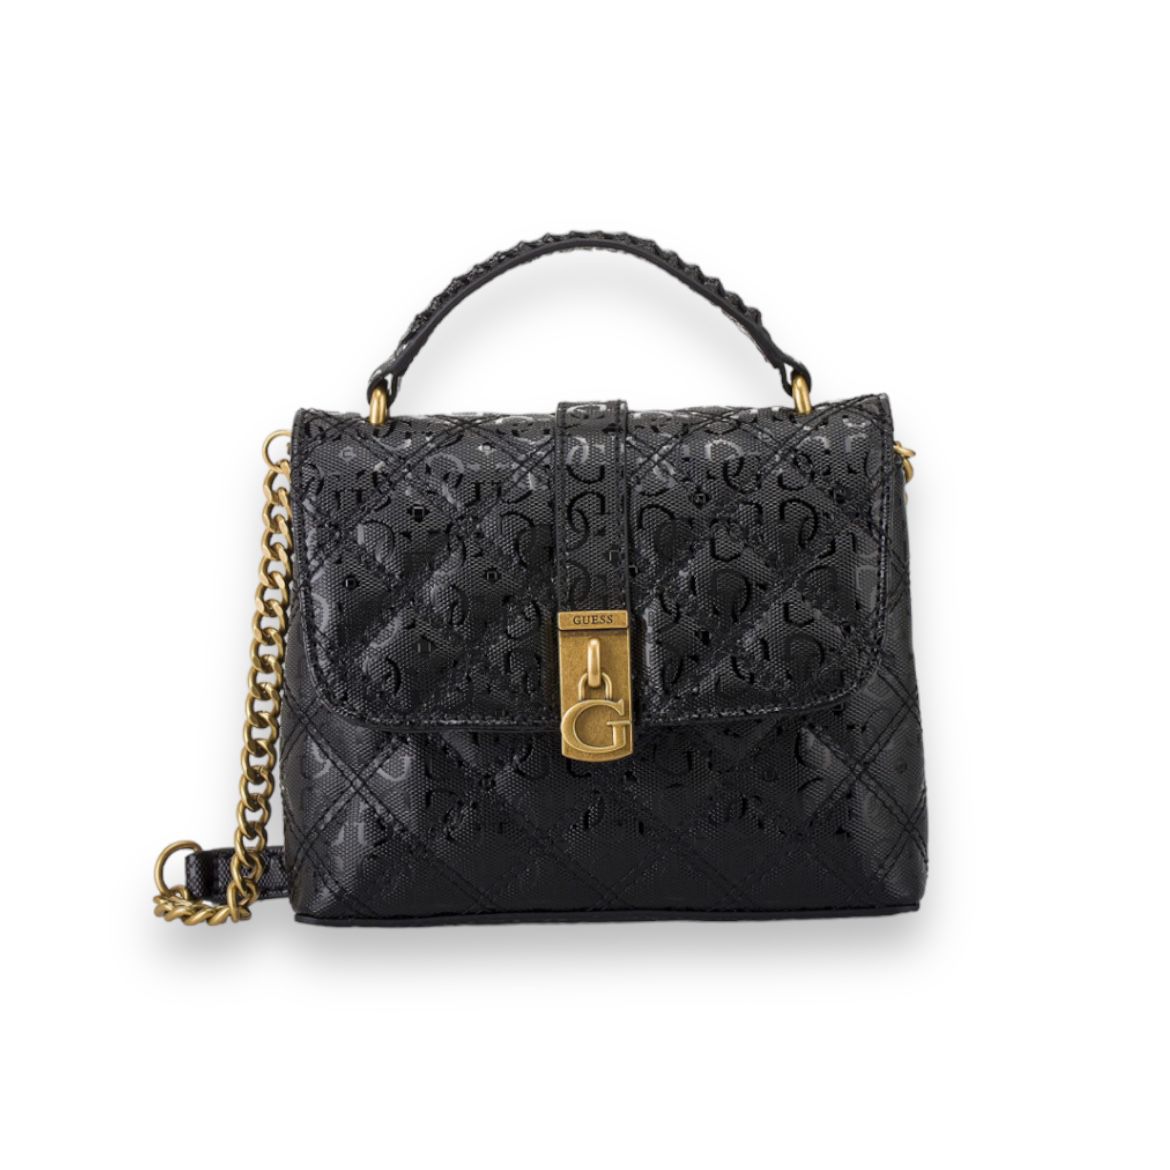 GUESS - GAIA MINI QUILTED CROSS BODY BAG - BLACK